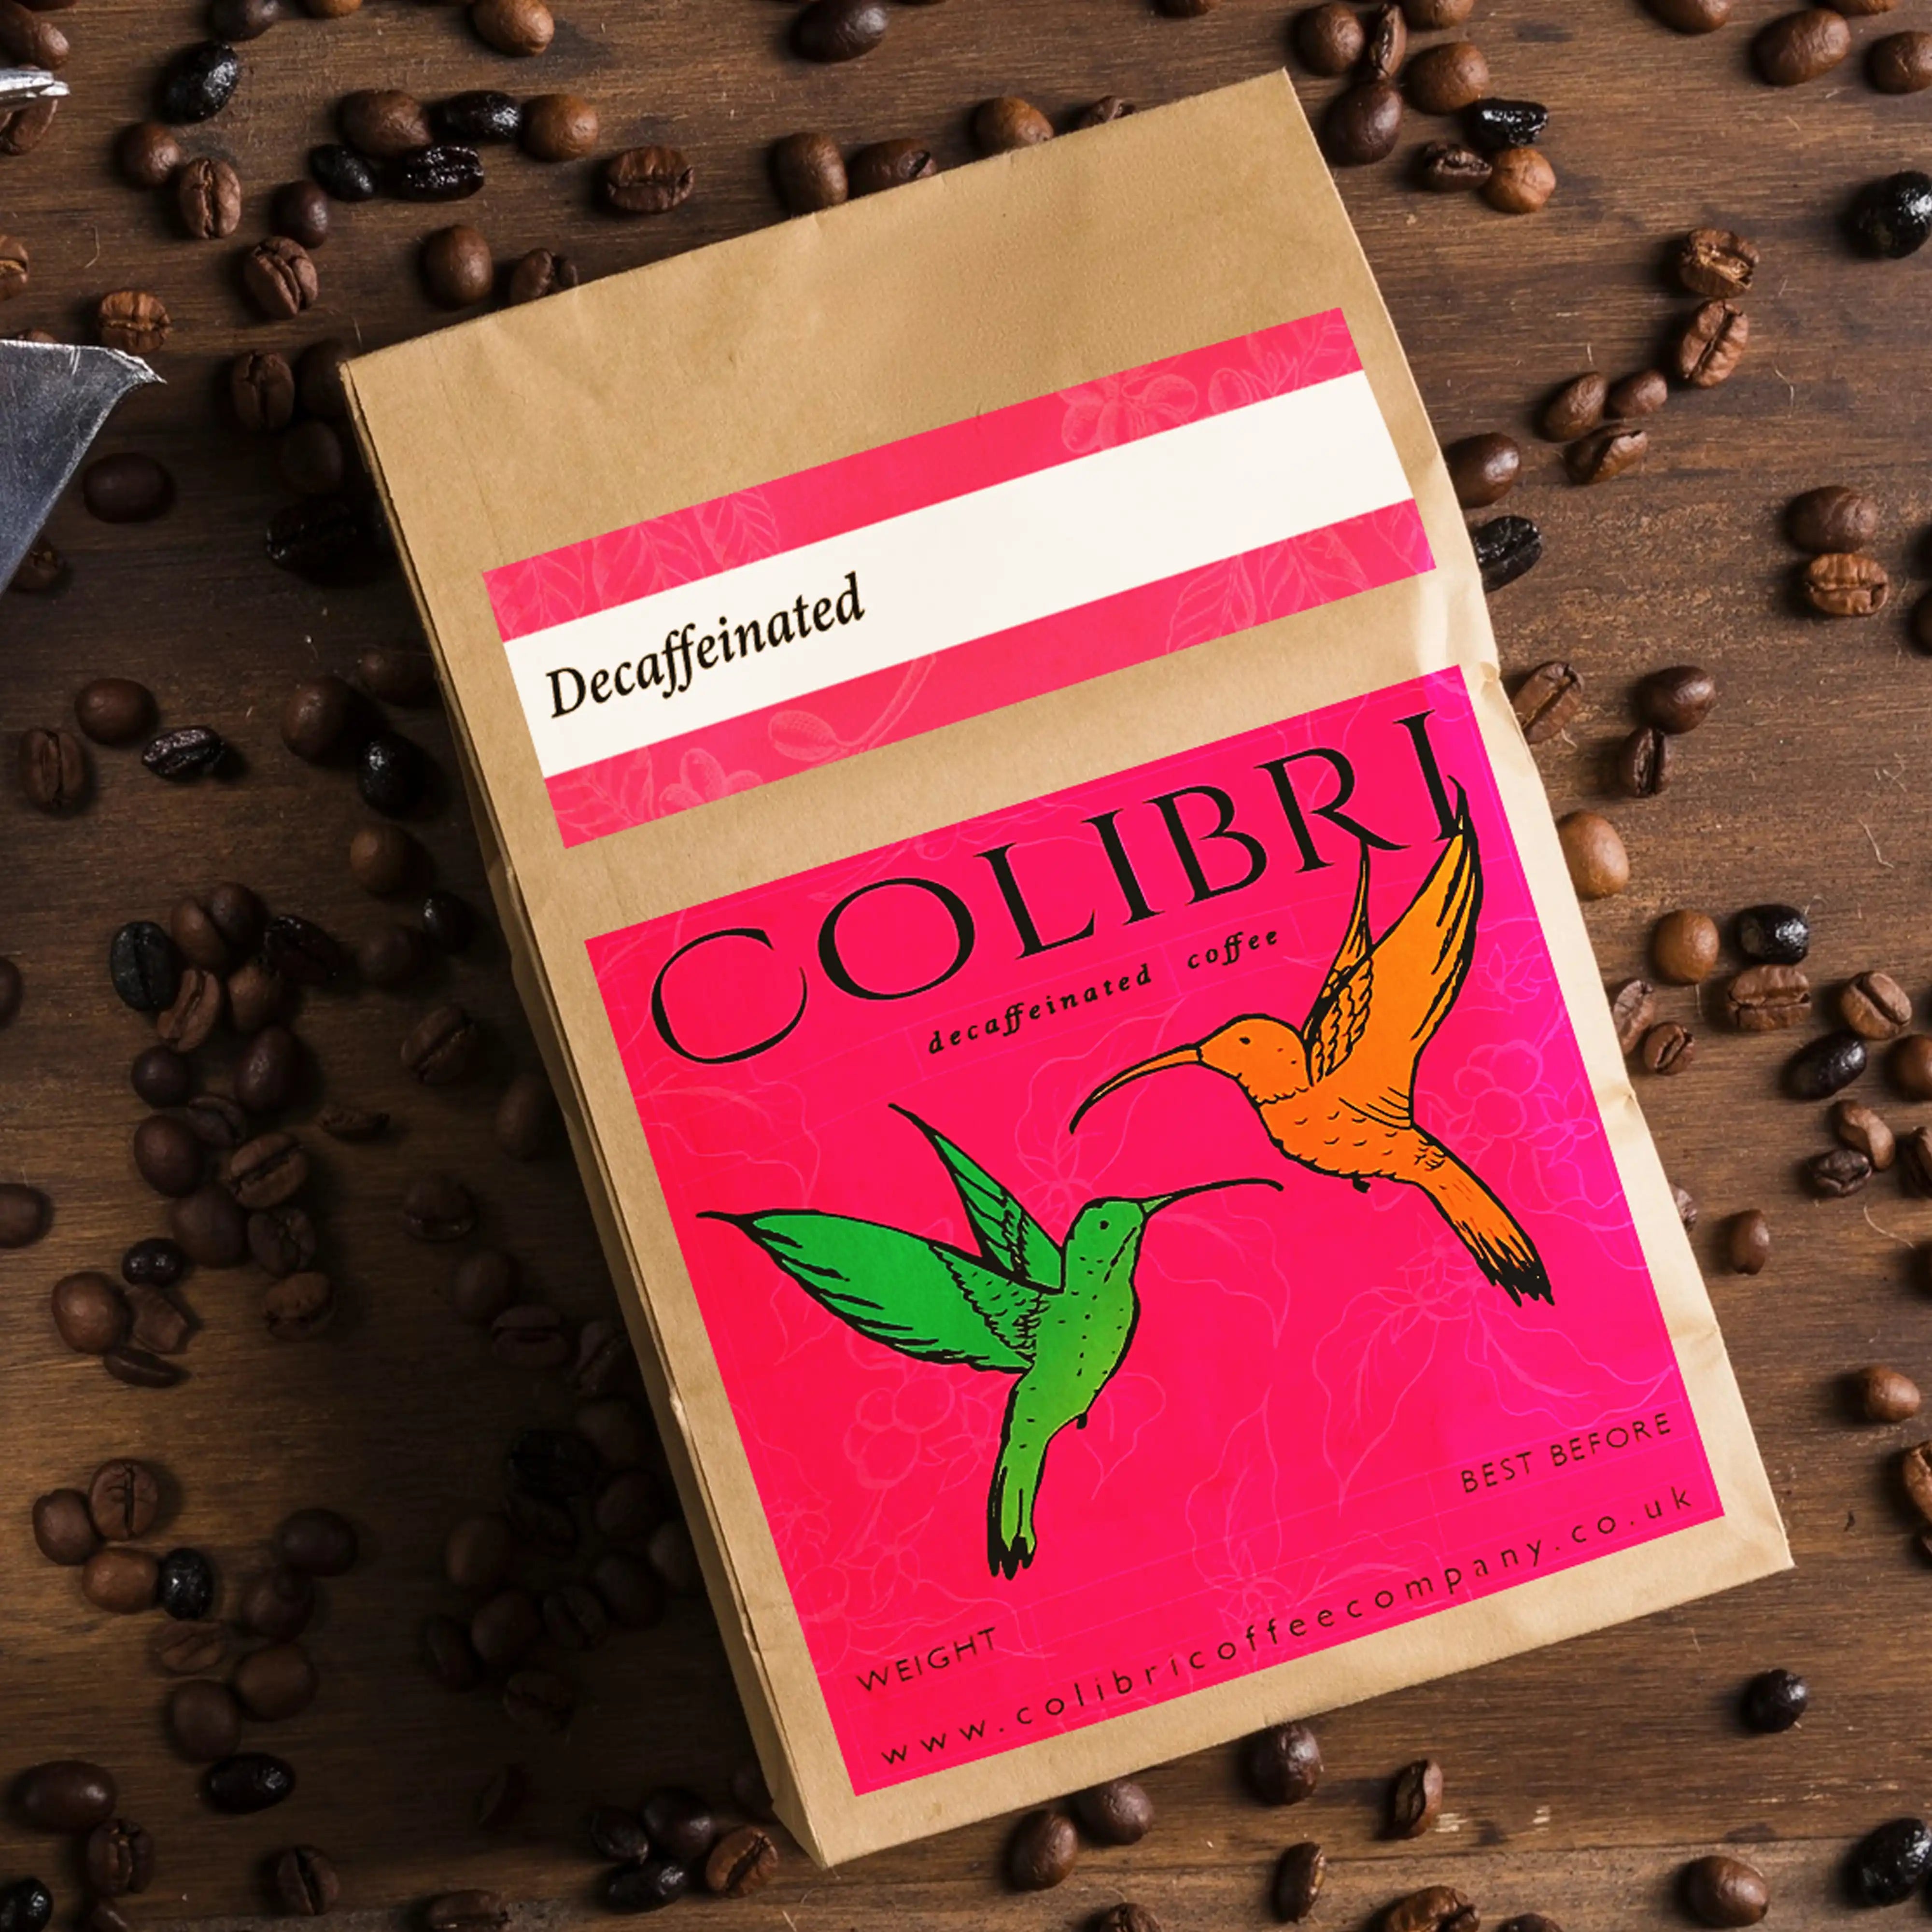 Decaffeinated - Colombia